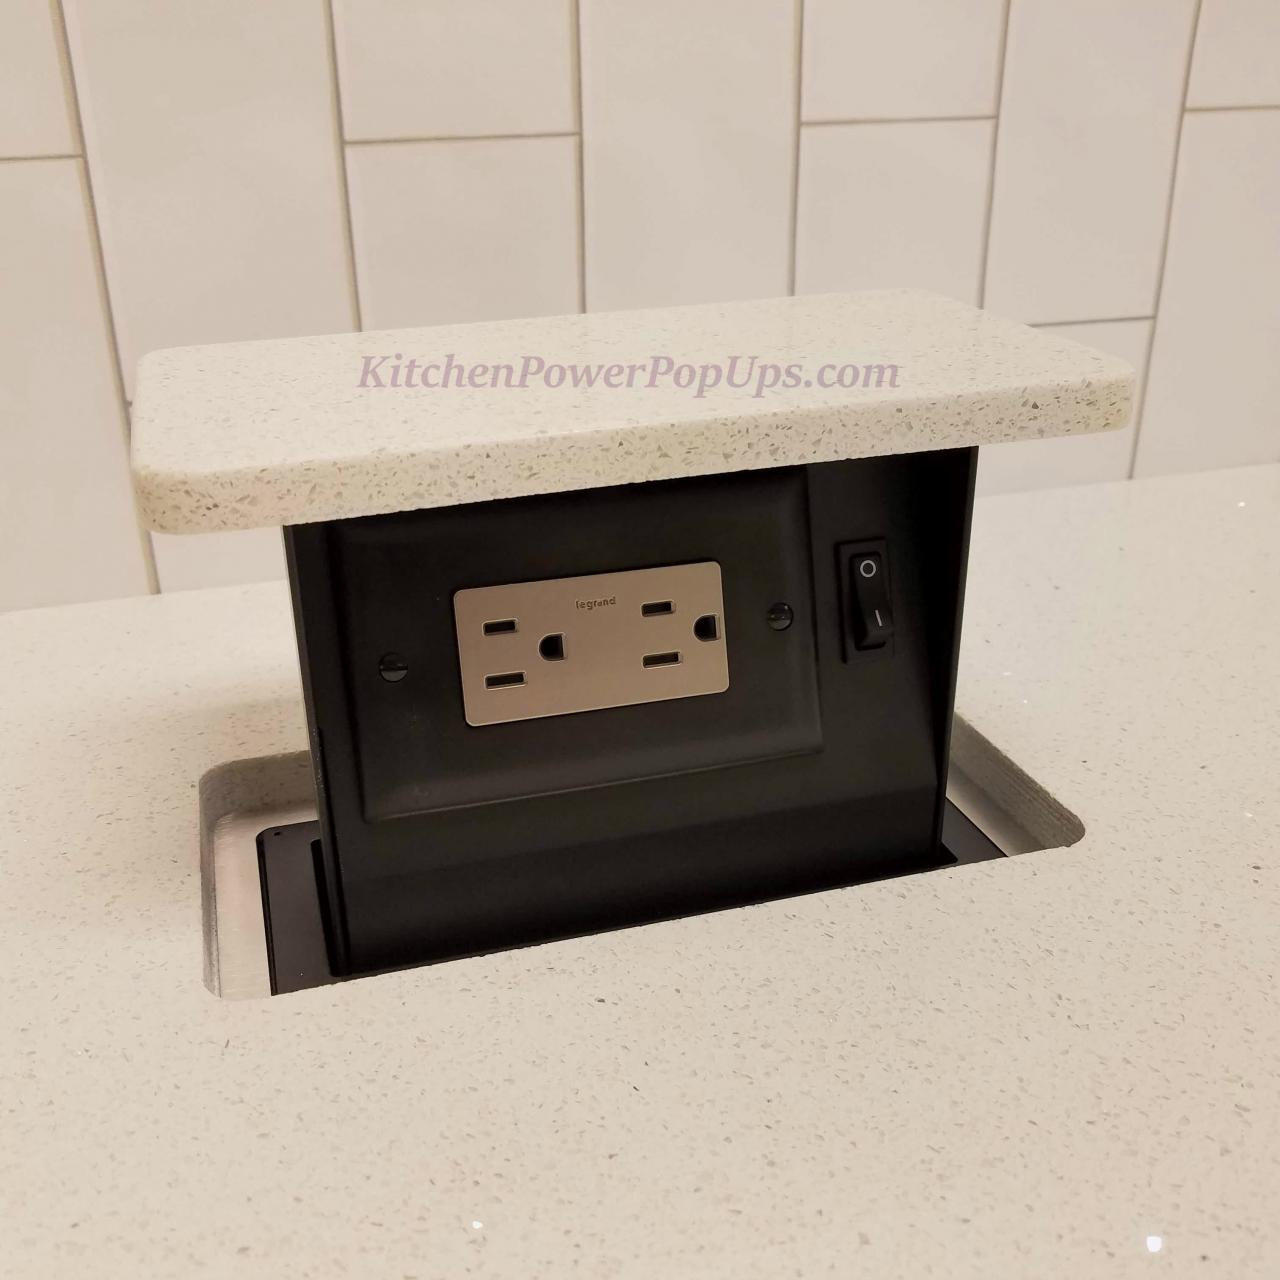 Hide your power in your kitchen with this pop up outlet box. Match your